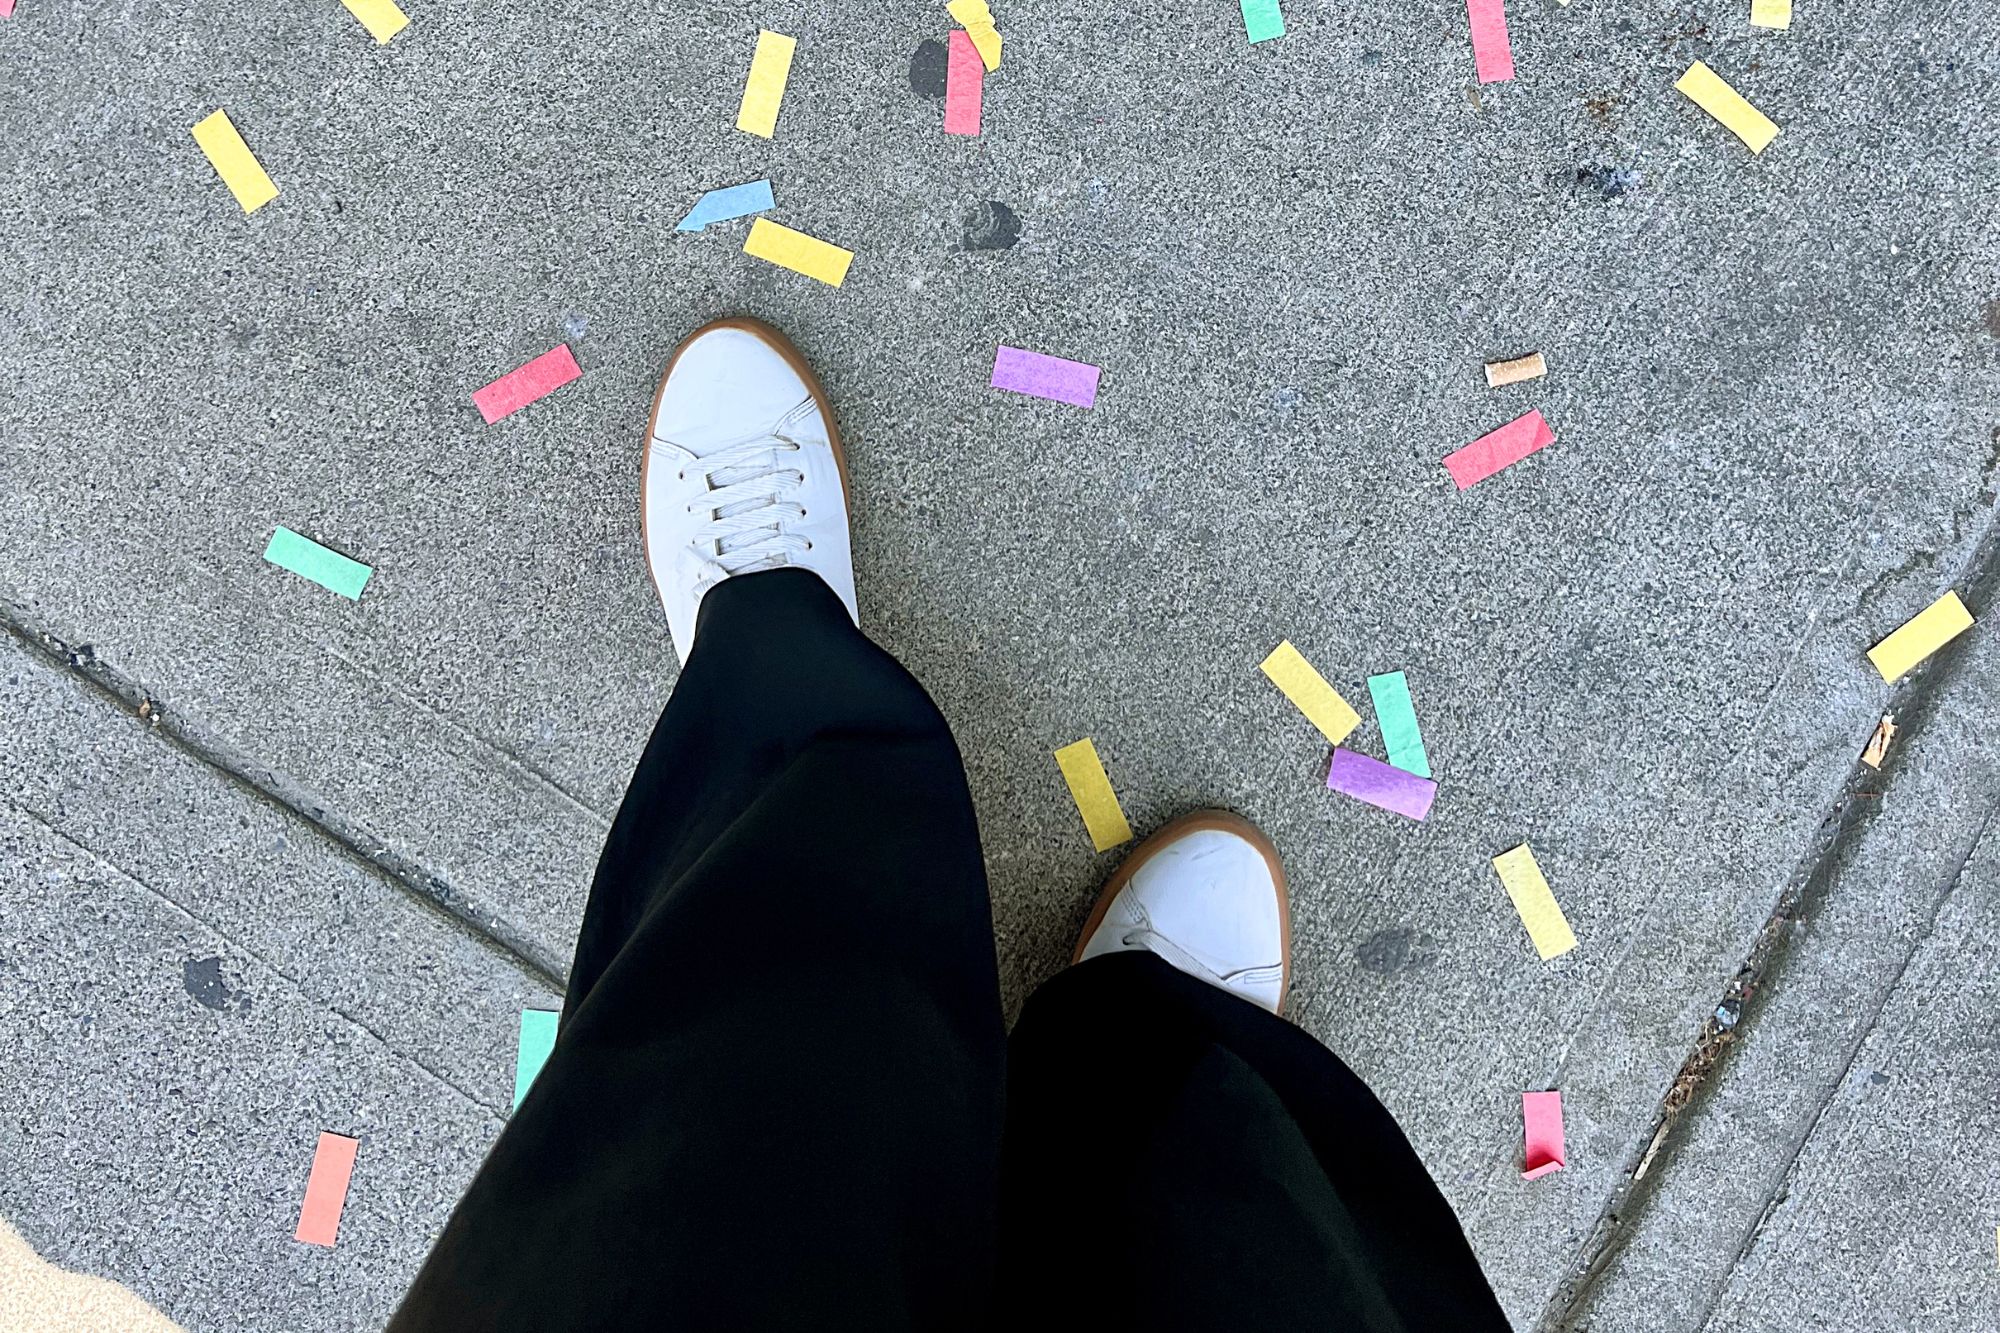 Black jumpsuit, white shoes, and confetti on the ground